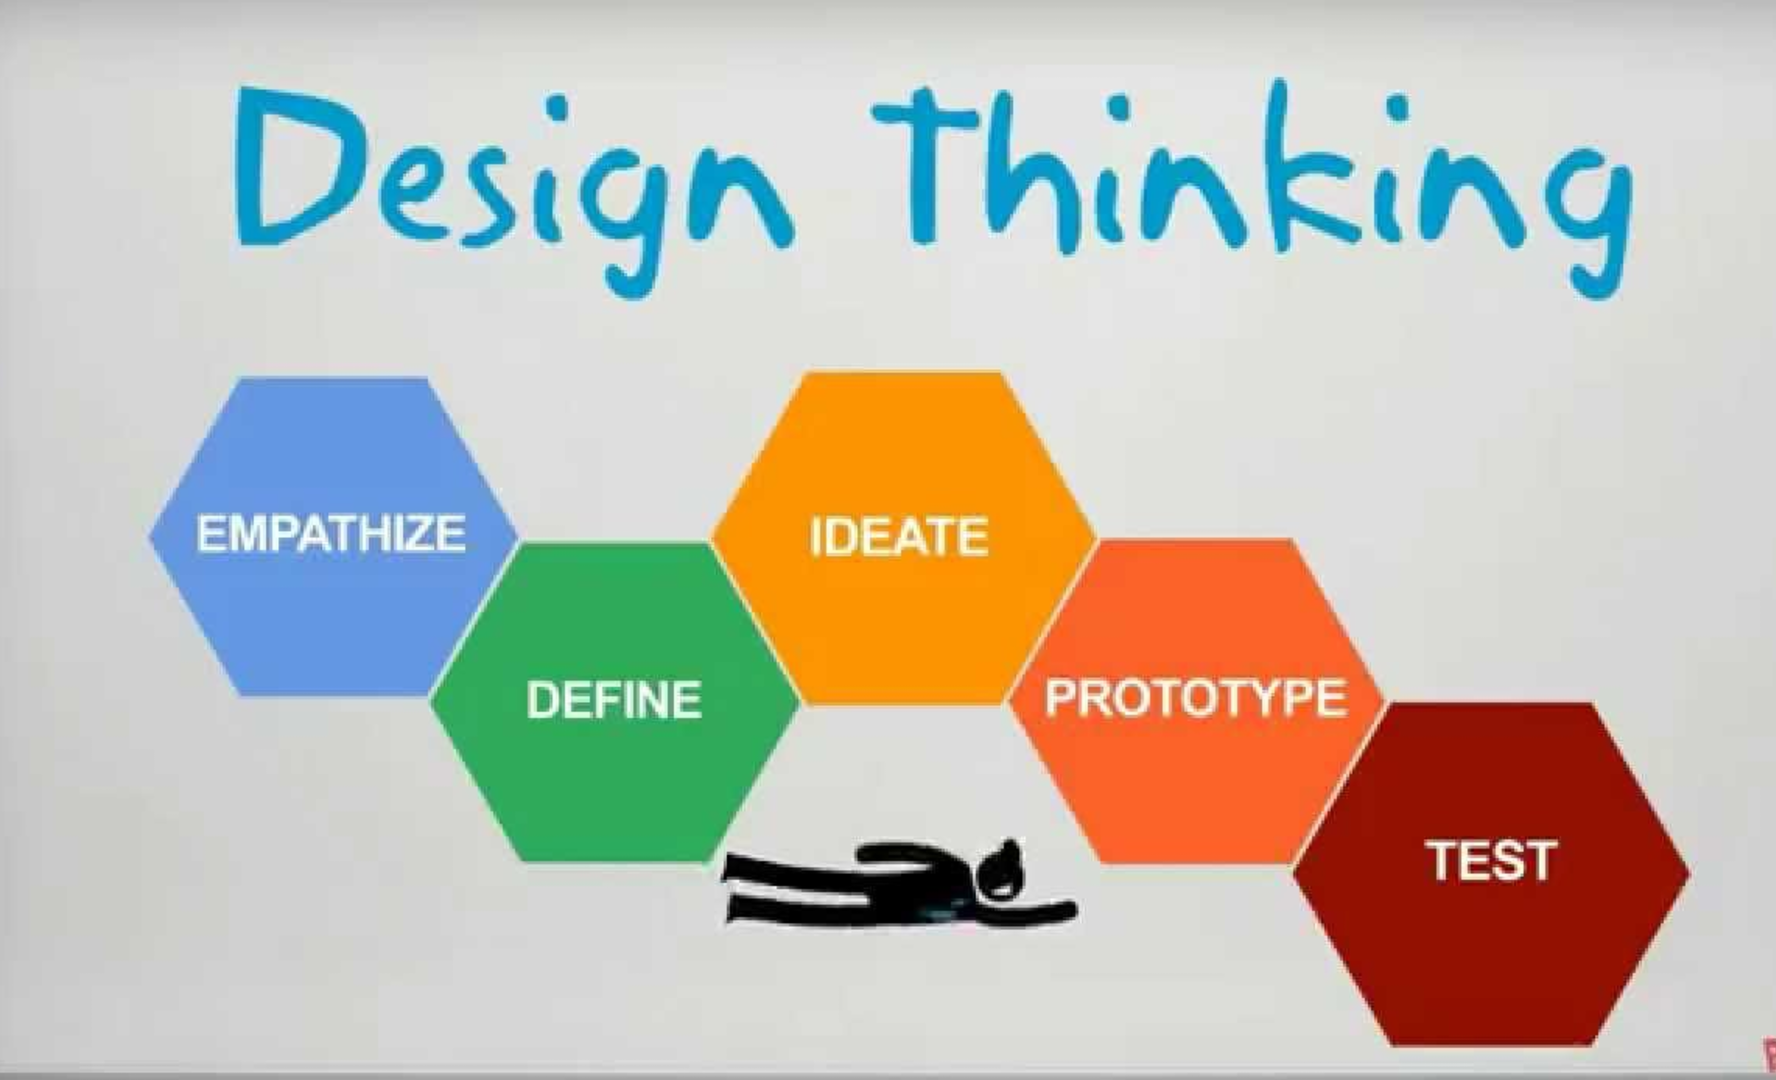 Design Thinking Online Course: The Ultimate Guide